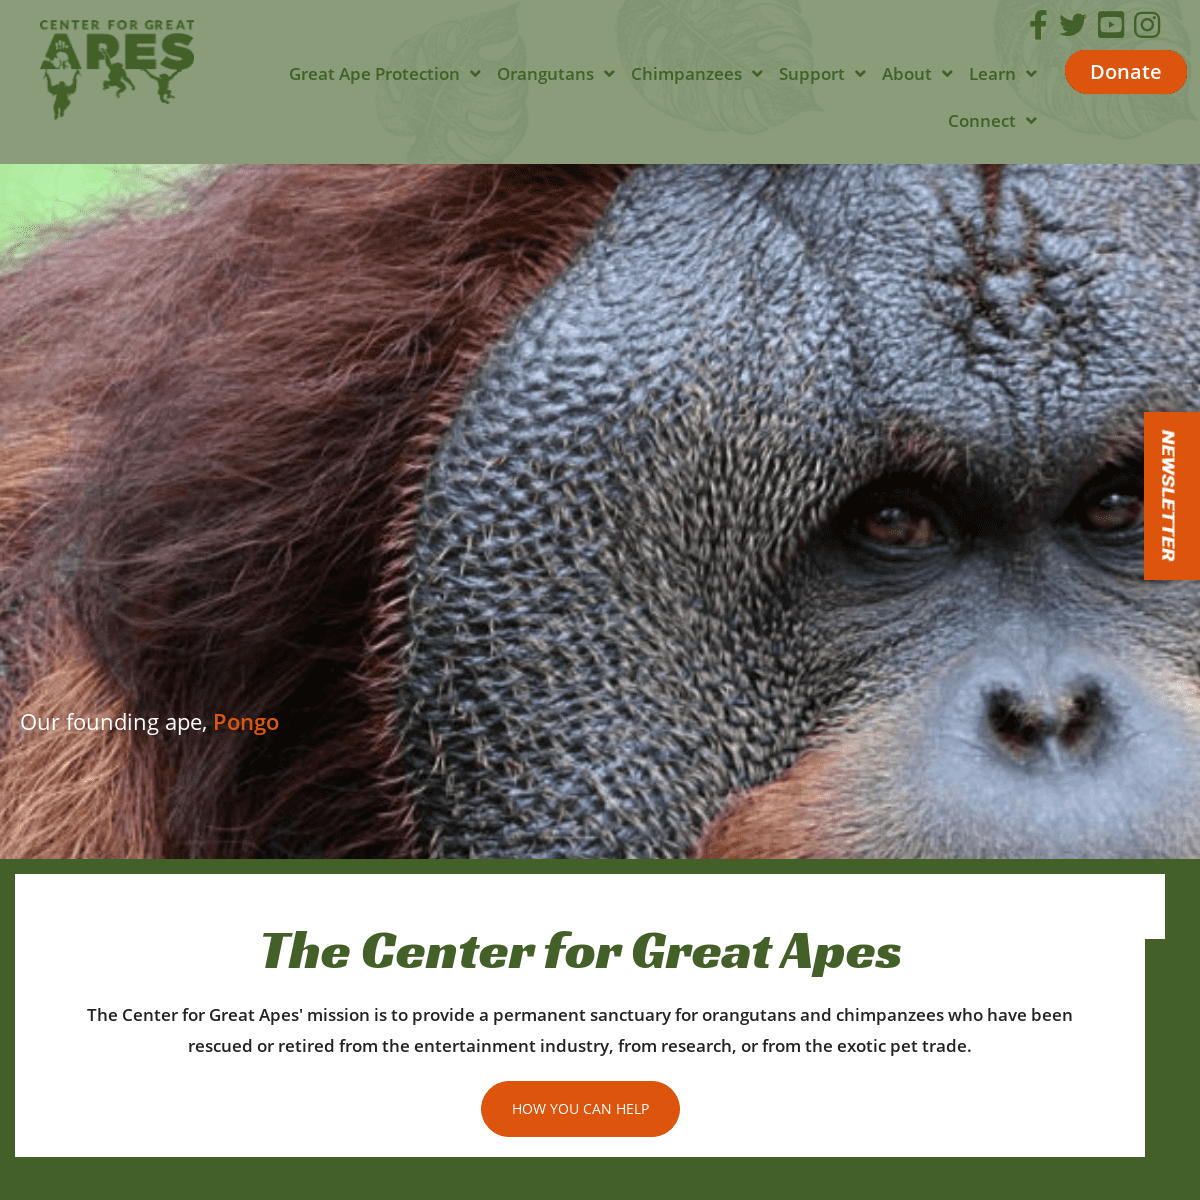 A complete backup of https://centerforgreatapes.org